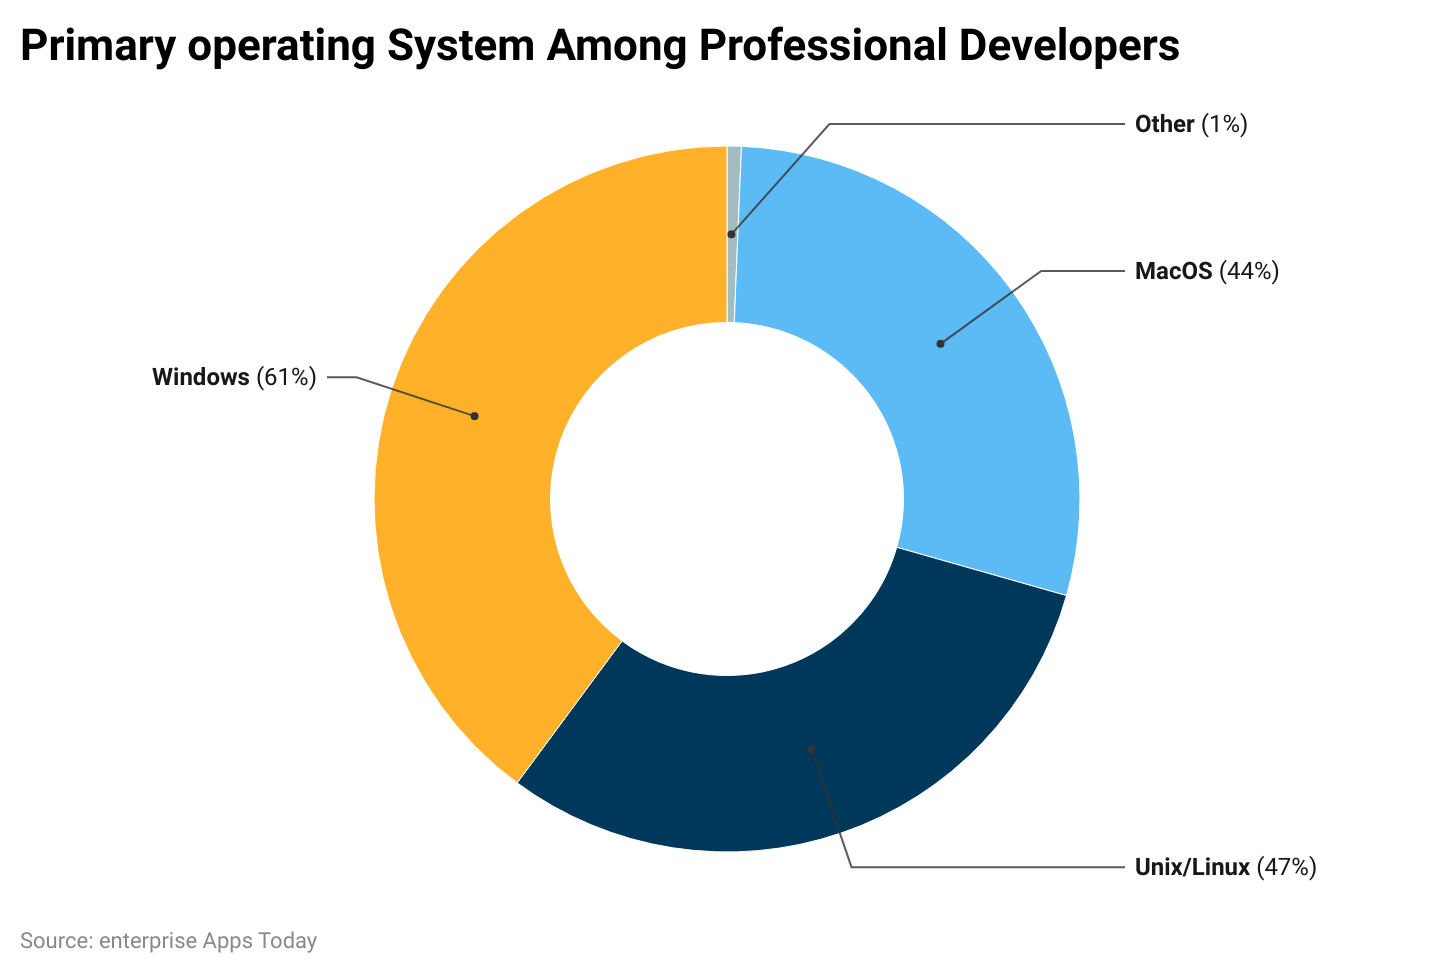 pie chart on operating systems among professional developers